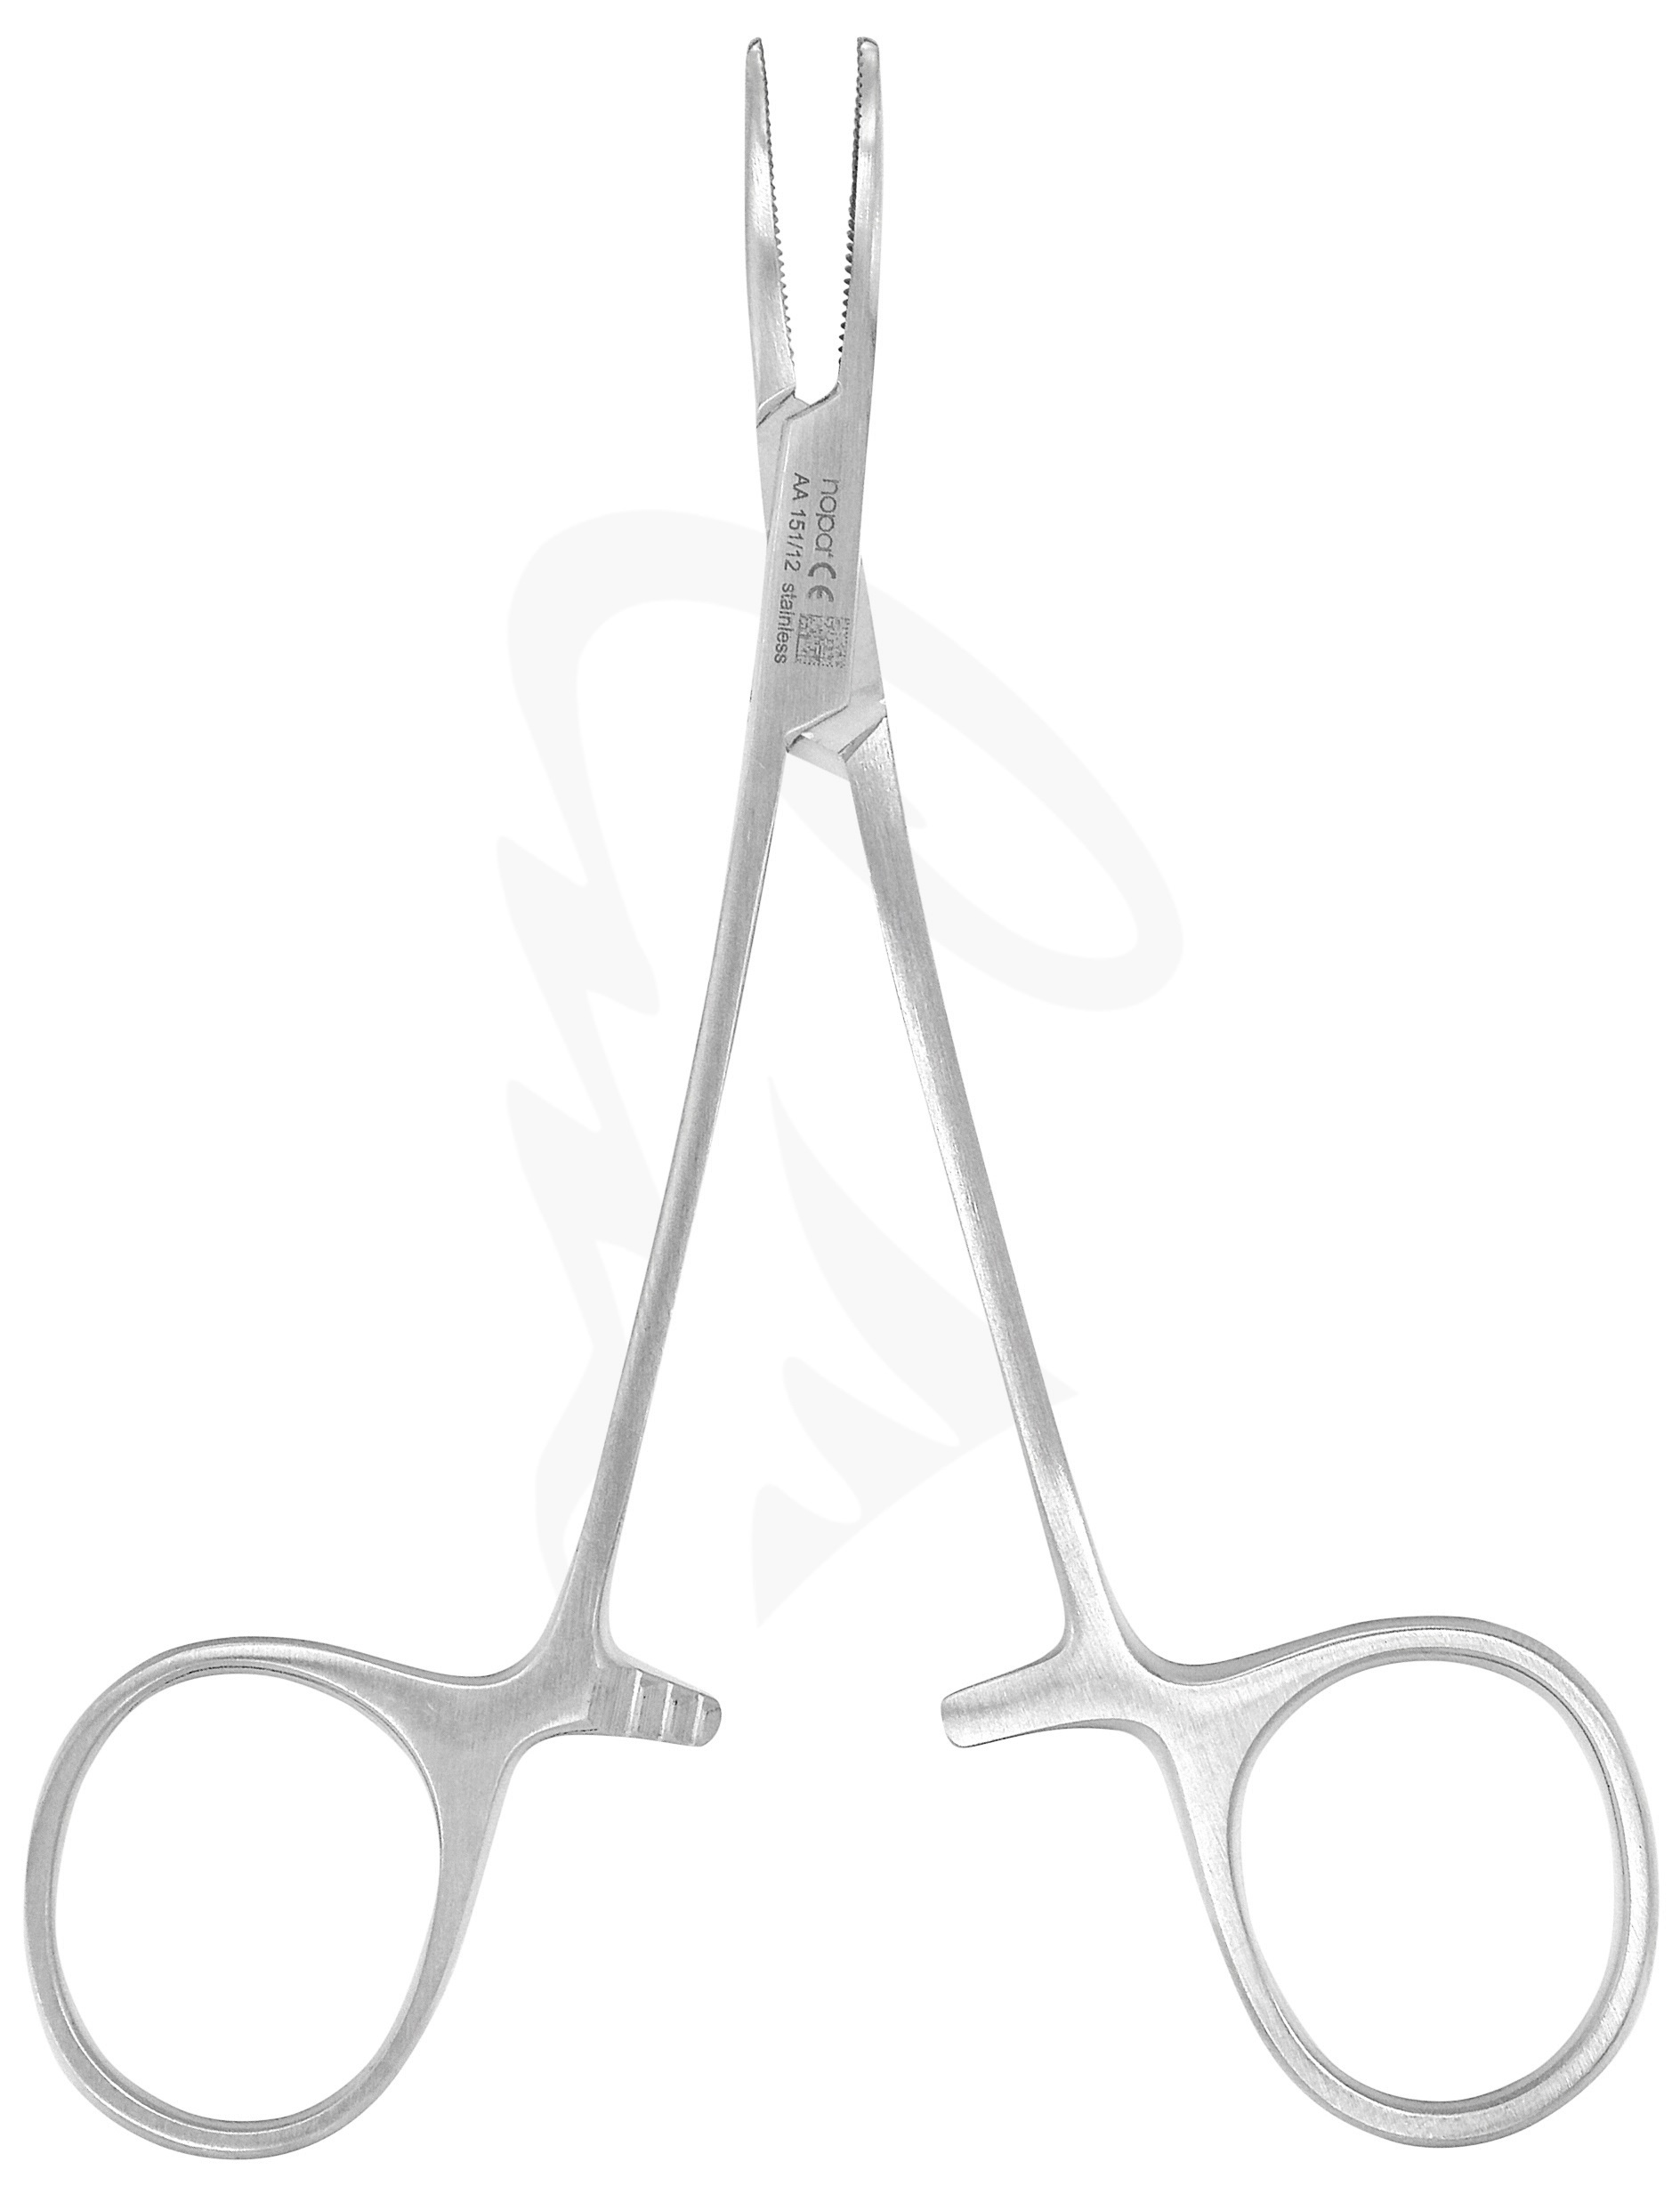 Nopa Halsted-Mosquito Artery Forcep Curved 14cm image 1